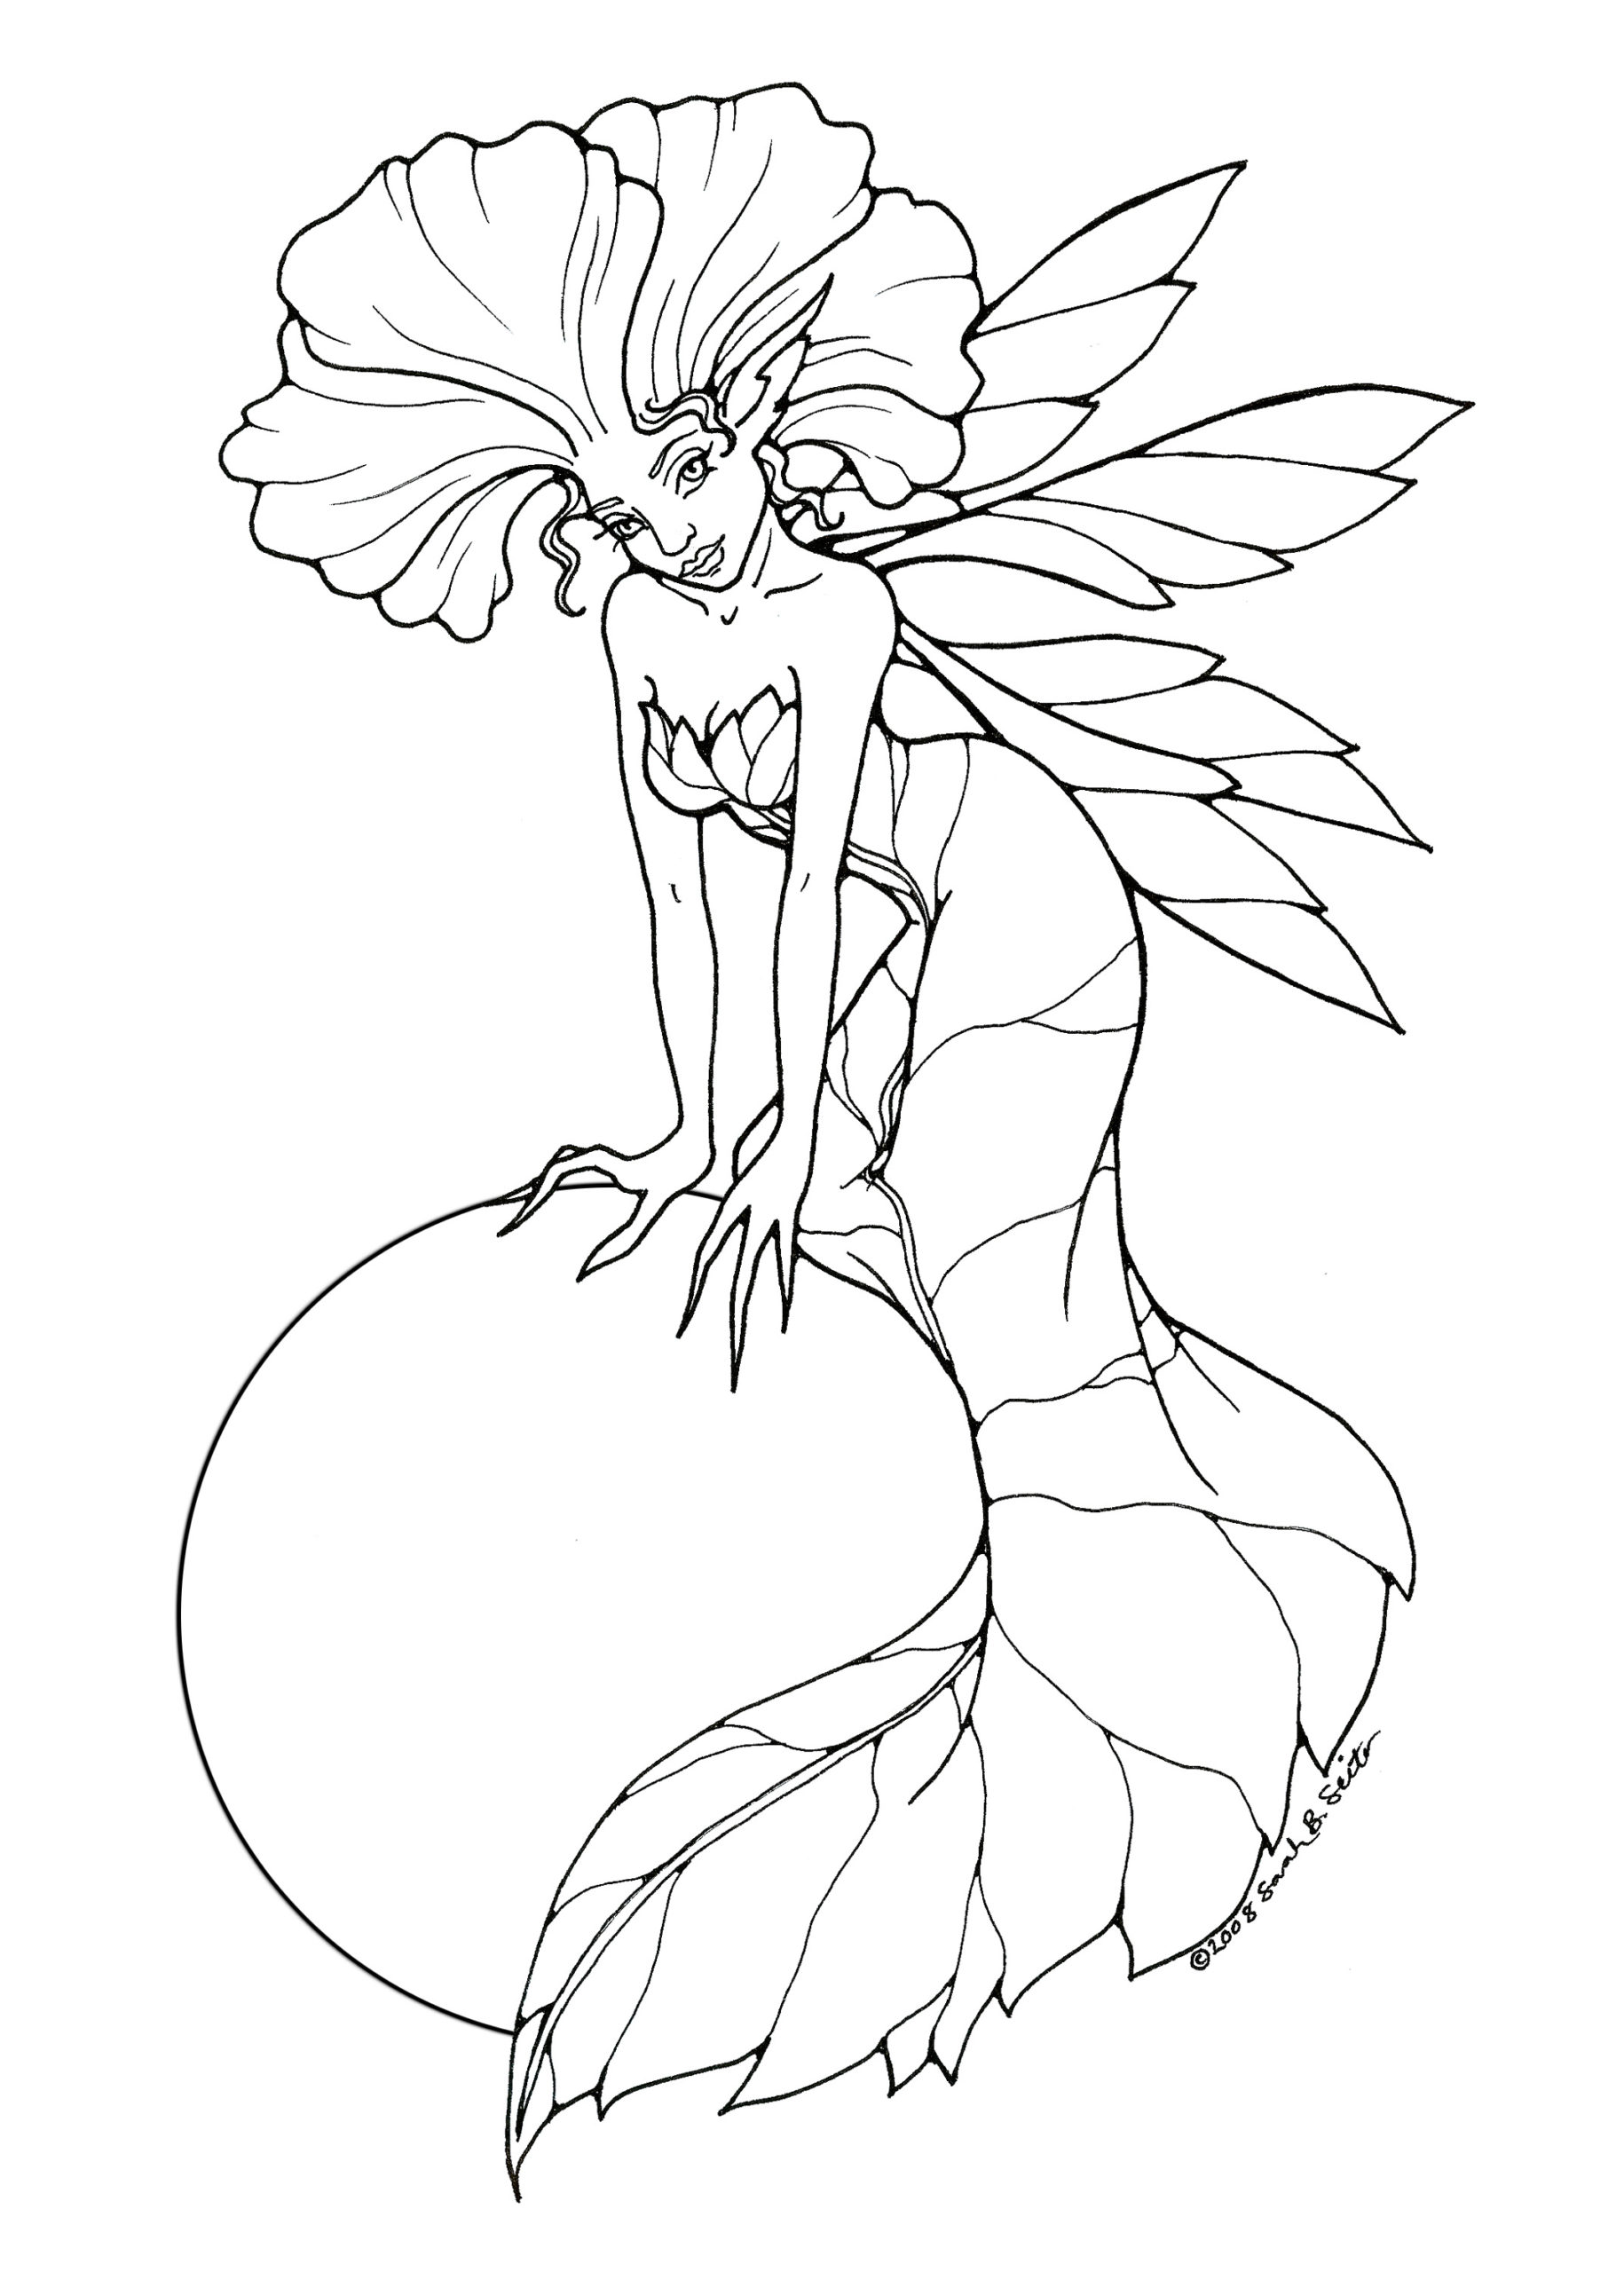 Coloring Pages : Free Printable Fairy Coloring For Kids Nature ...